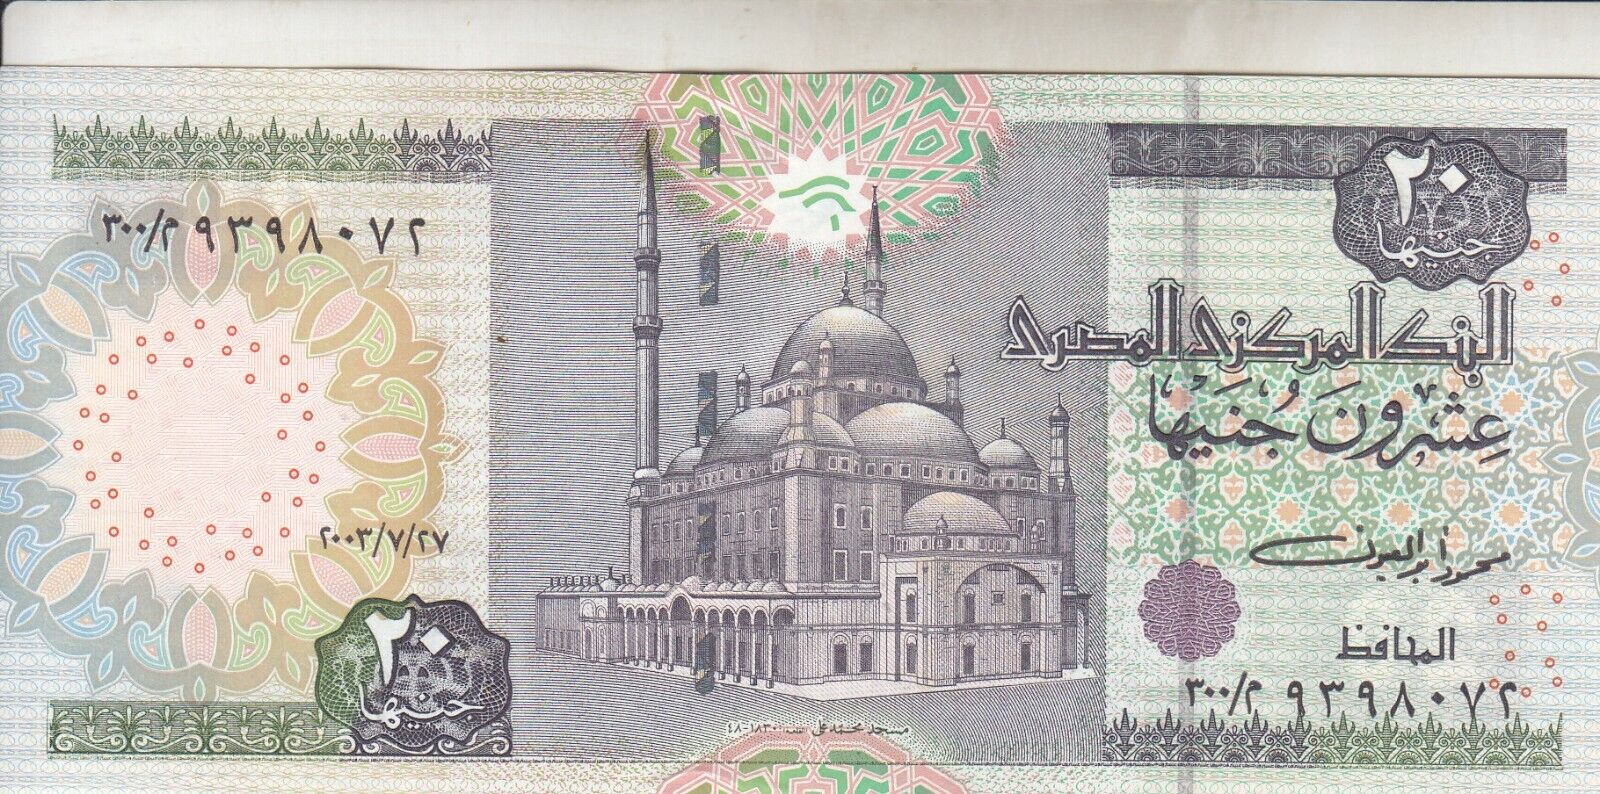 EGYPT 20 EGP POUNDS 2003 P-65b 300 SIG UN Online limited product OYOUN Columbus Mall REPLACEMENT #20